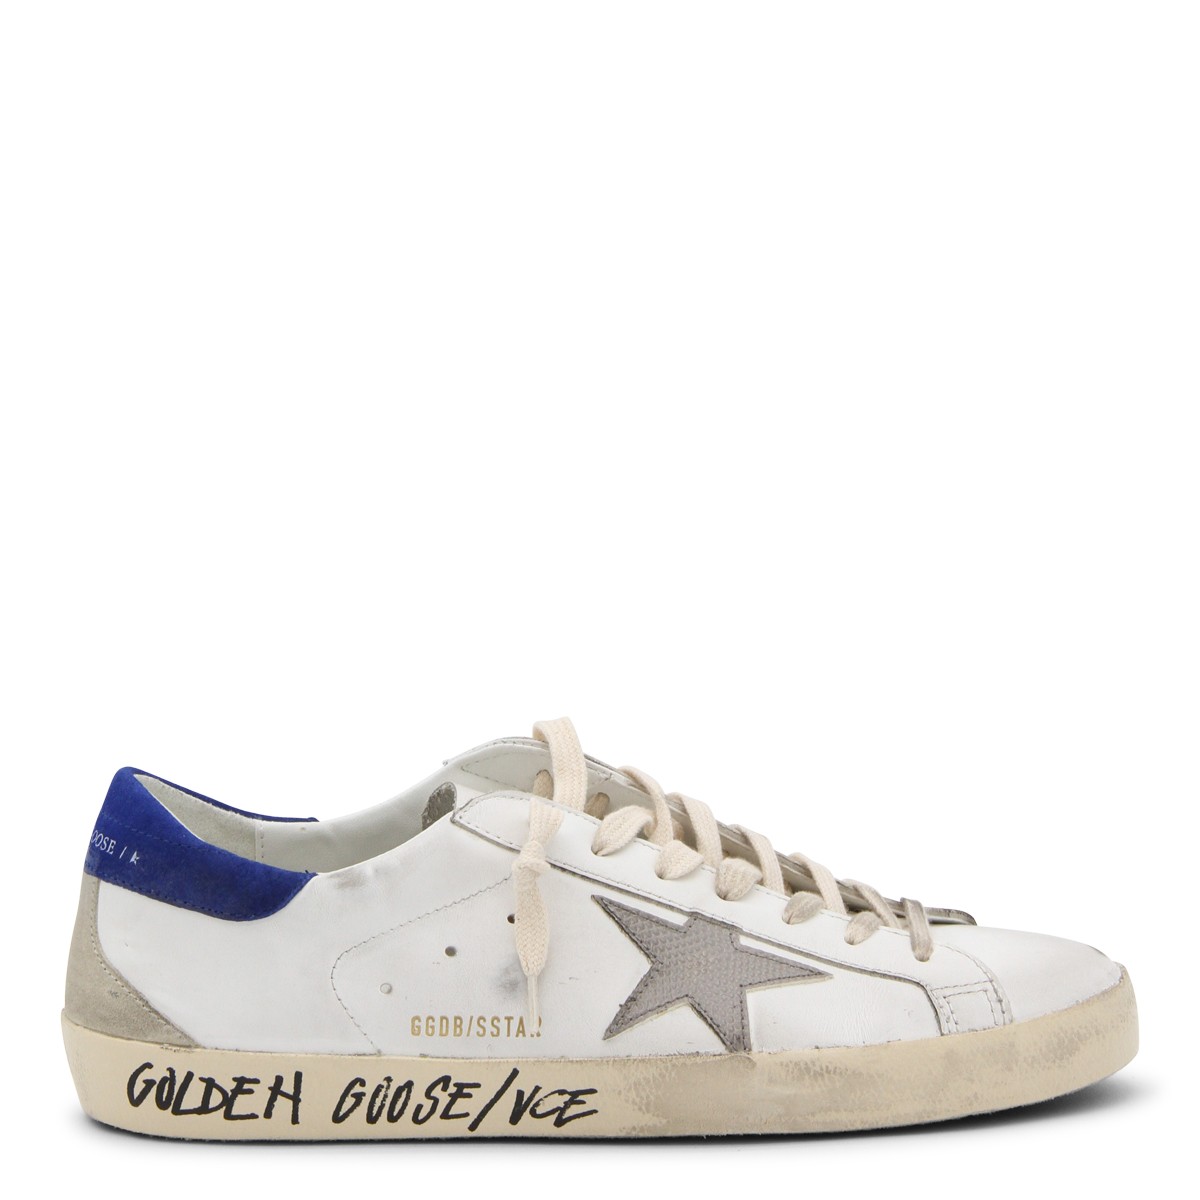 WHITE AND BLUE LEATHER SUPER-STAR SNEAKERS